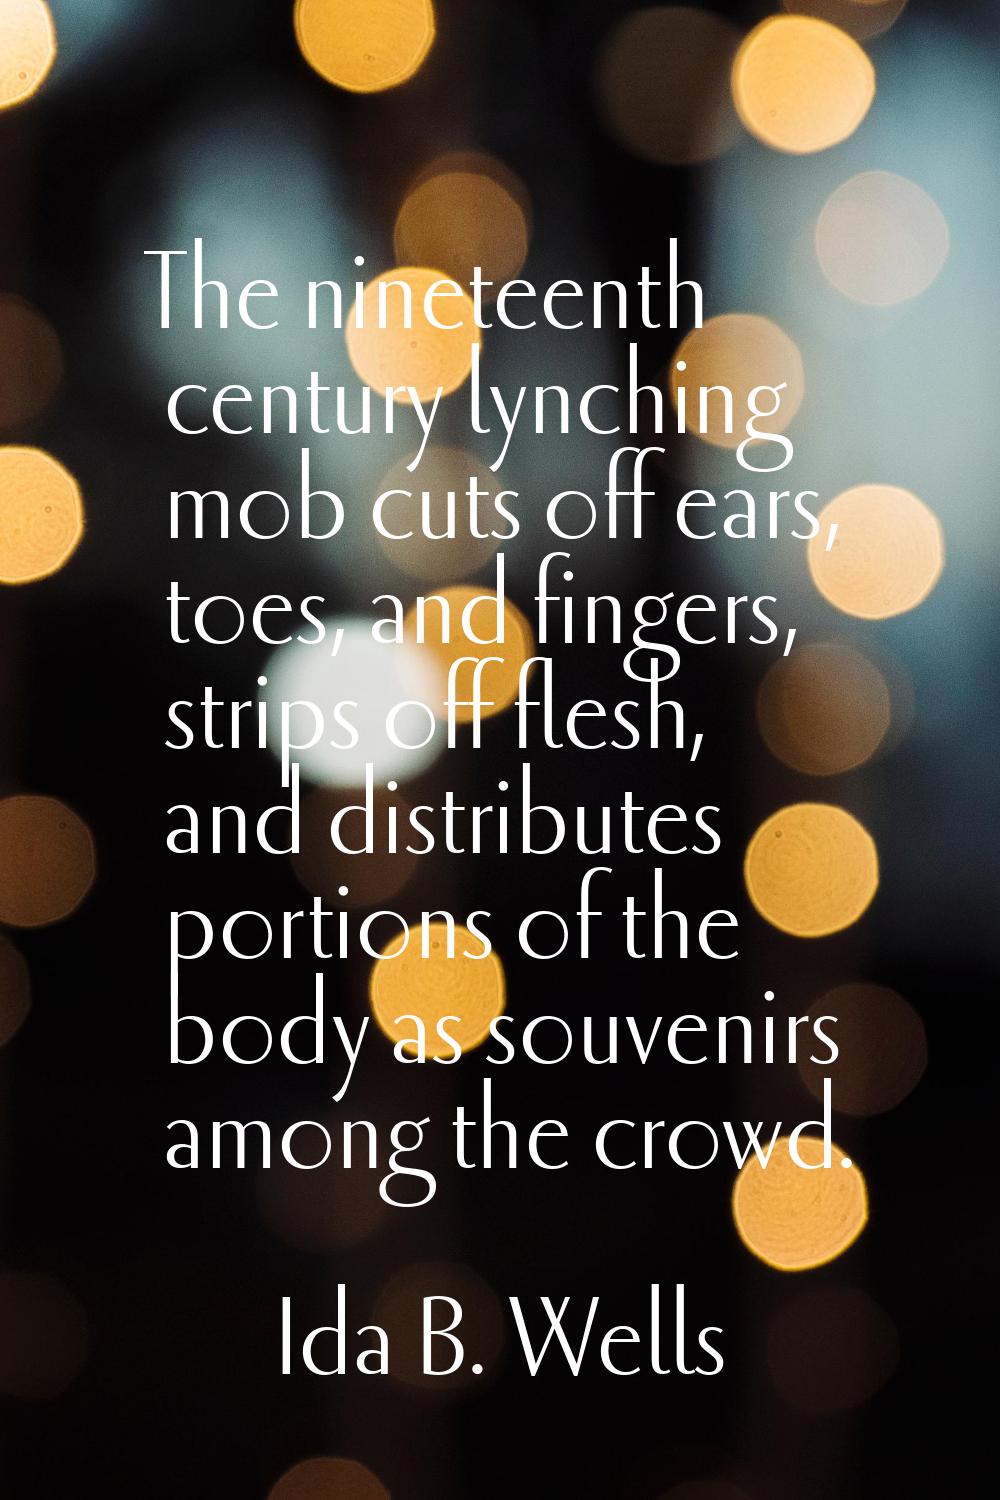 The nineteenth century lynching mob cuts off ears, toes, and fingers, strips off flesh, and distrib